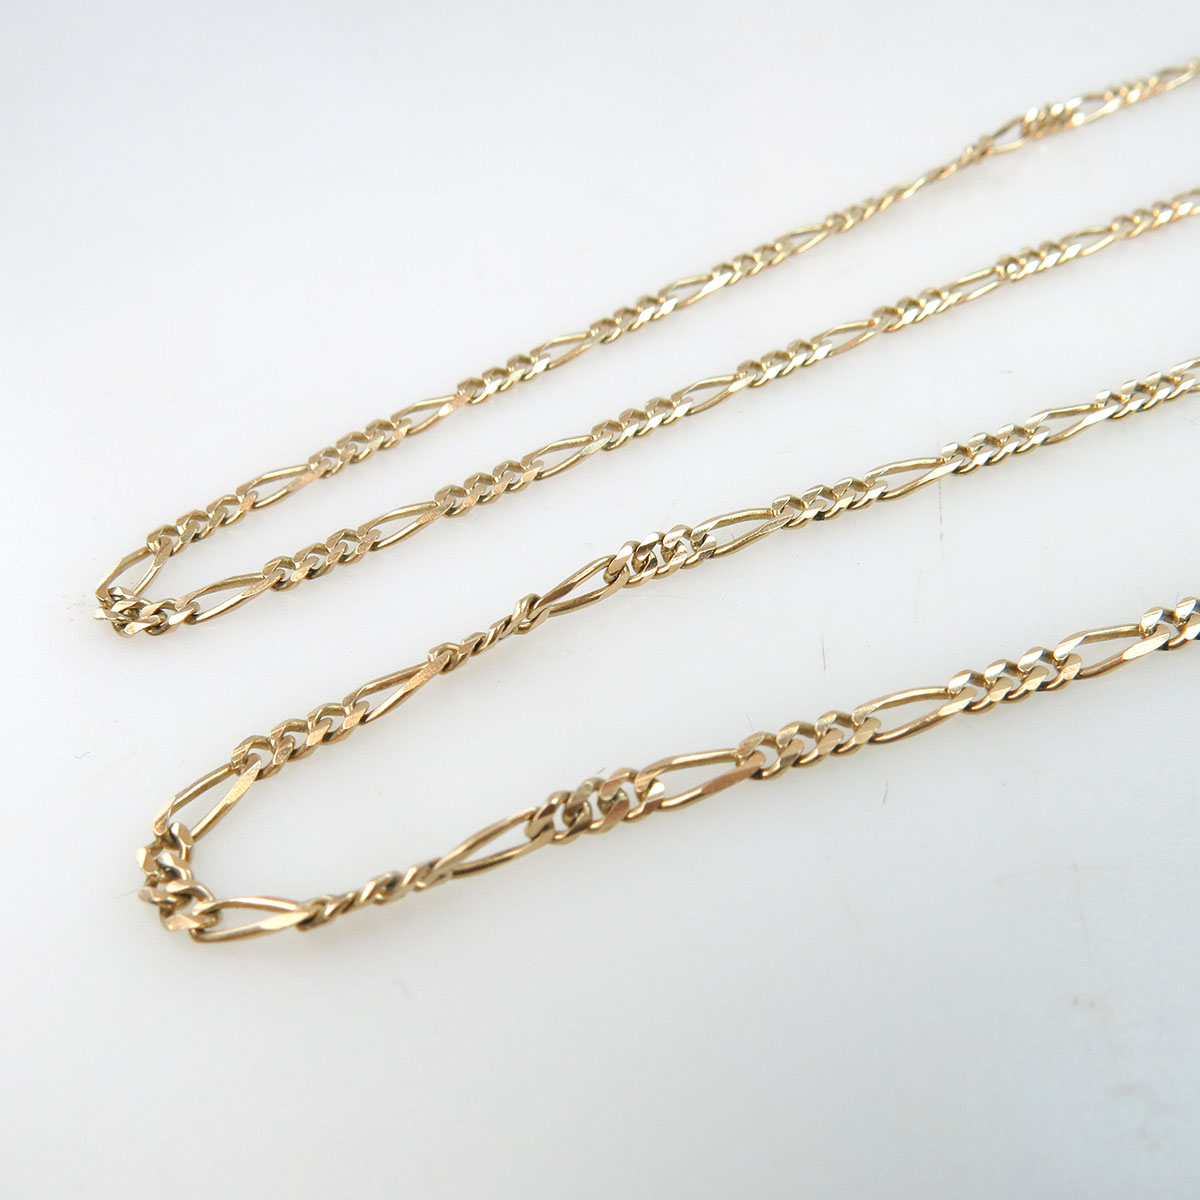 2 x 10k Yellow Gold Modified Curb Link Chains